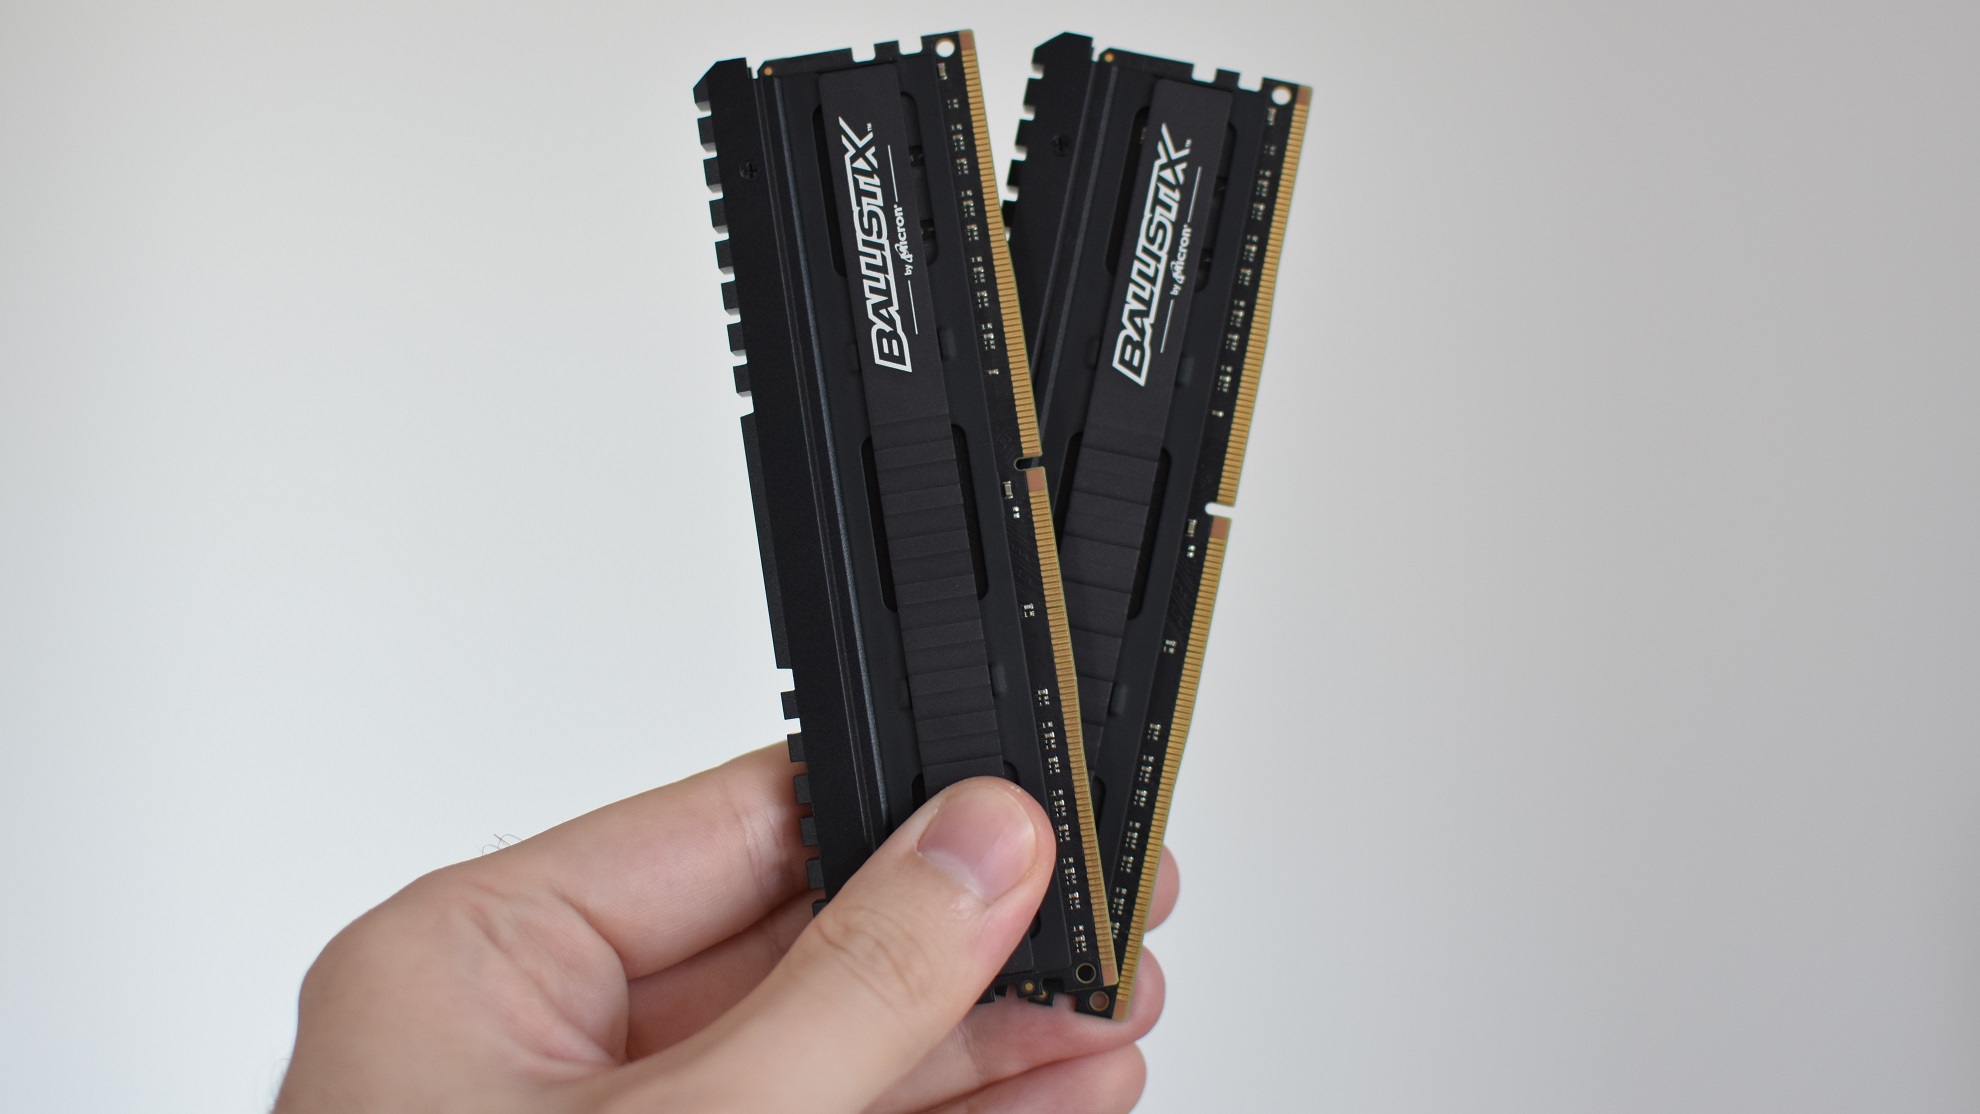 Two sticks of DDR4 RAM being held in a hand.